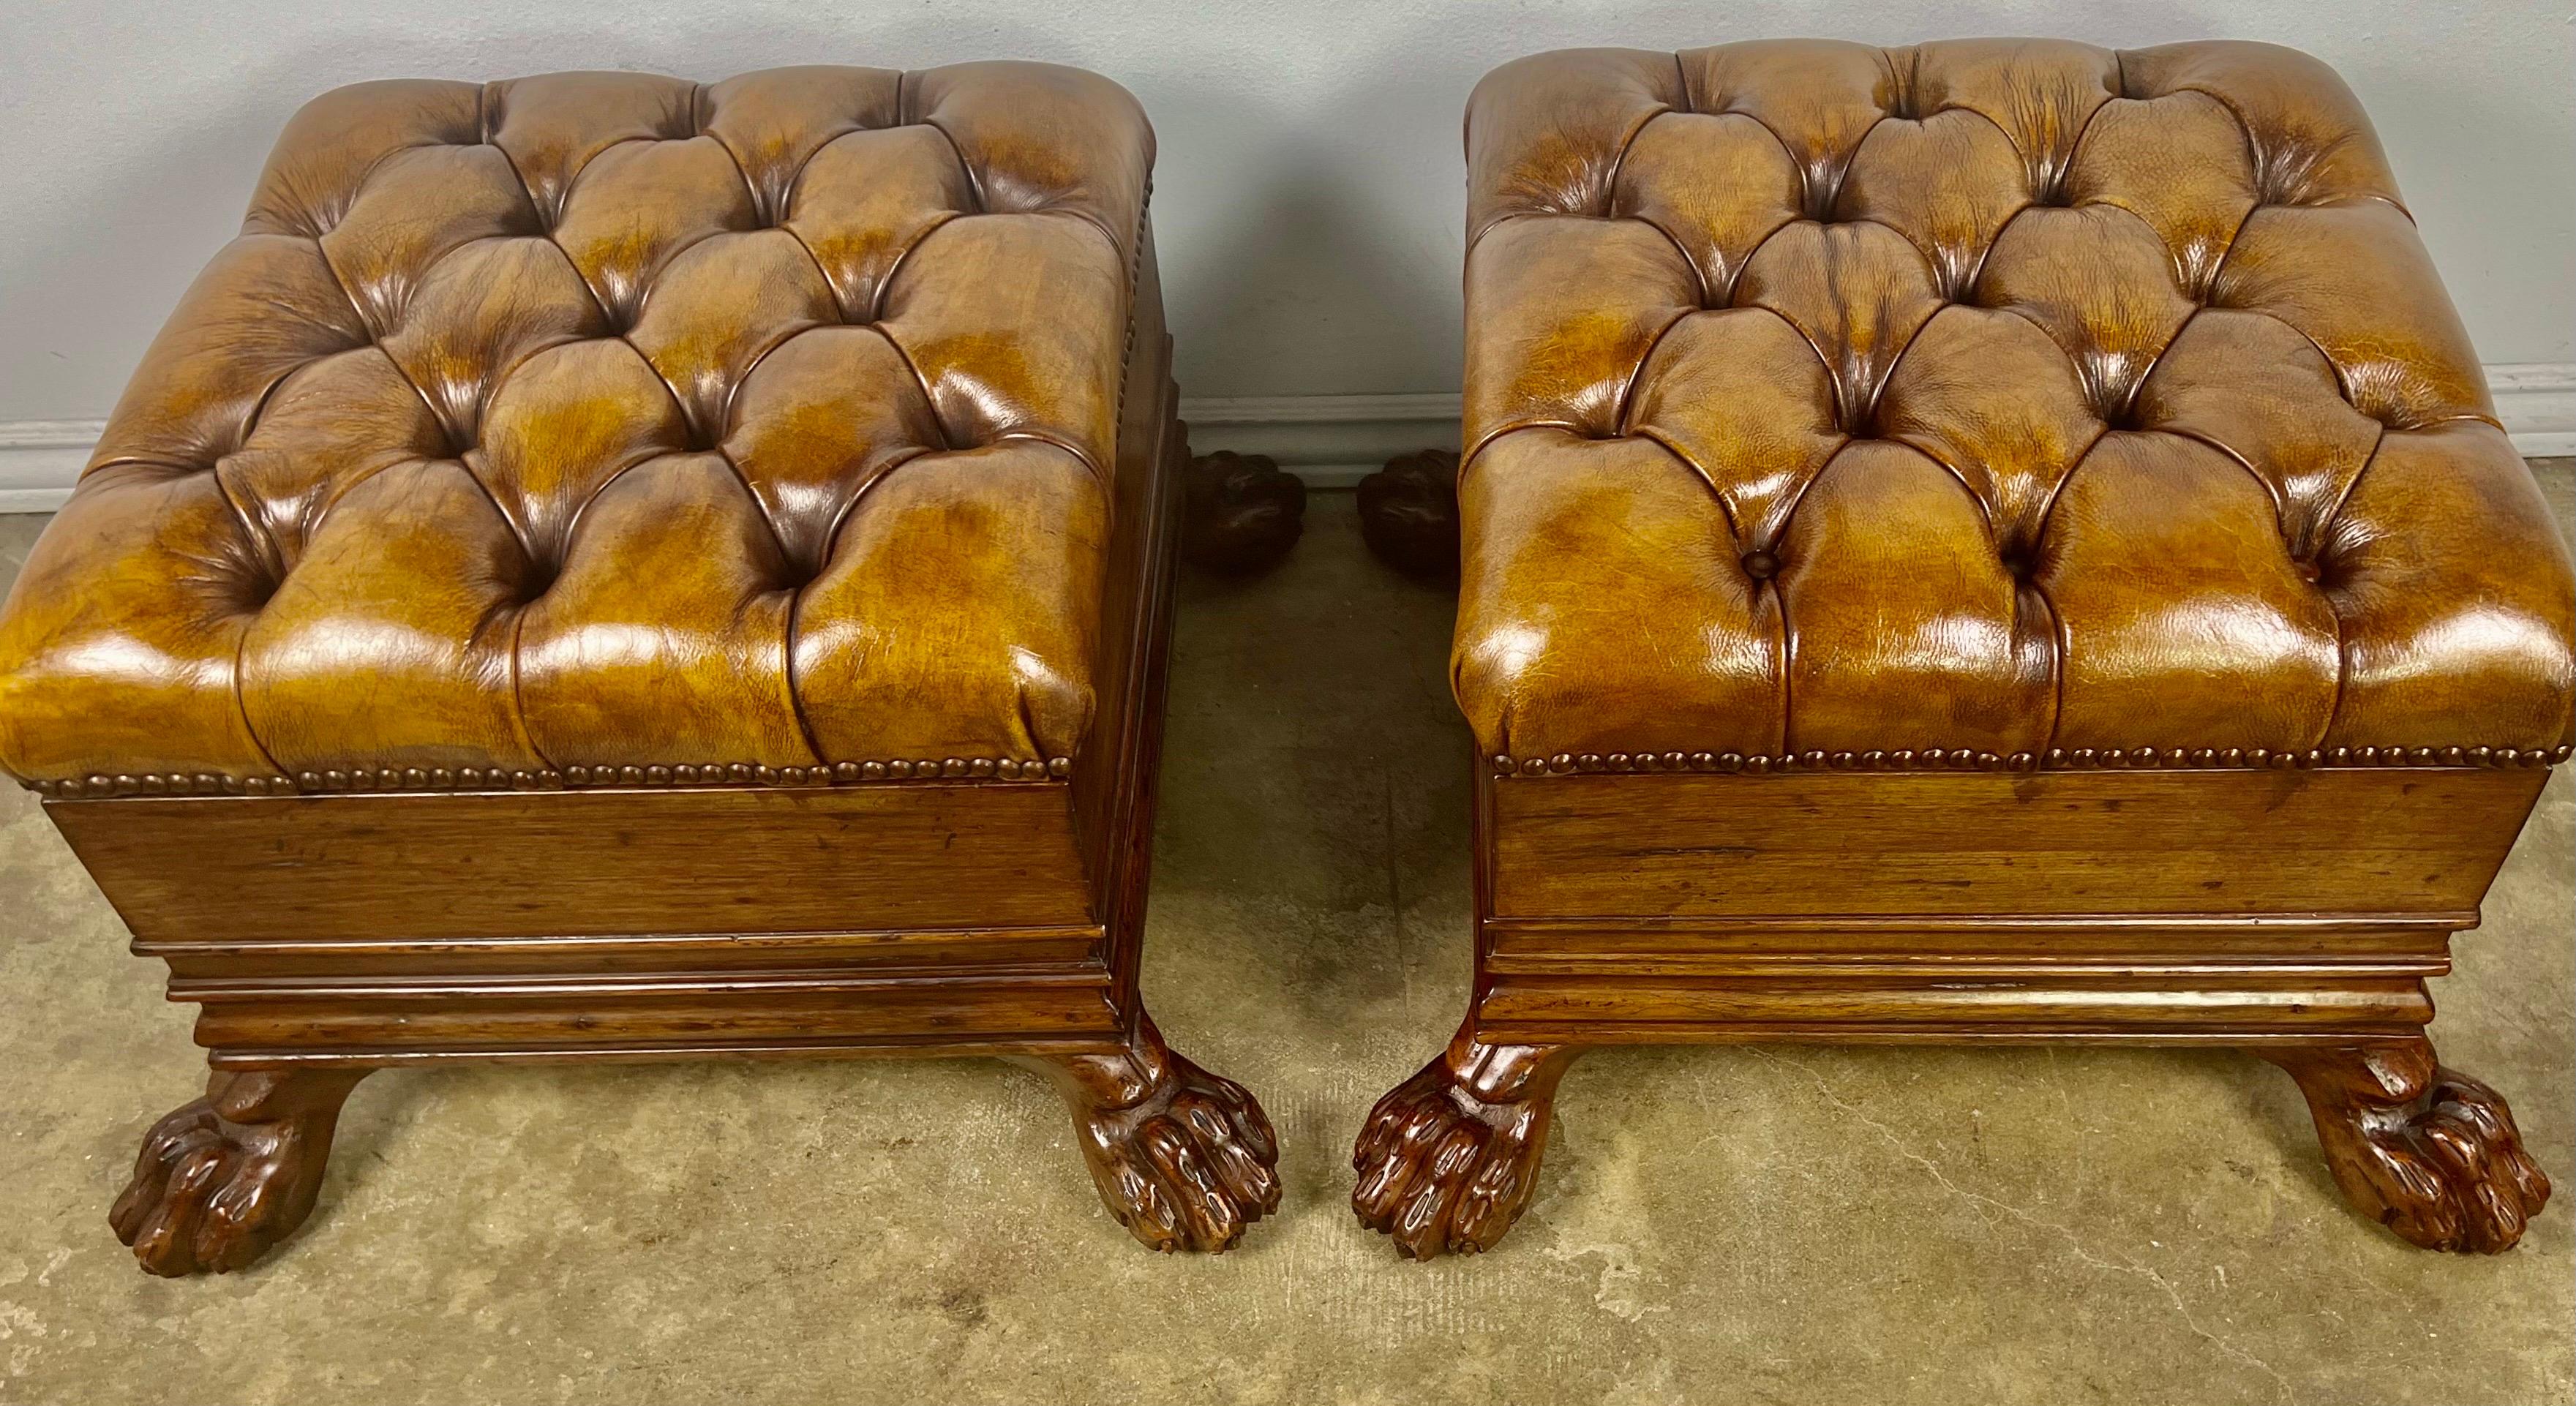 Pair of 19th century English Regency style foot stools standing on paw carved wood feet. The benches are upholstered in tufted leather with nailhead trim detail.